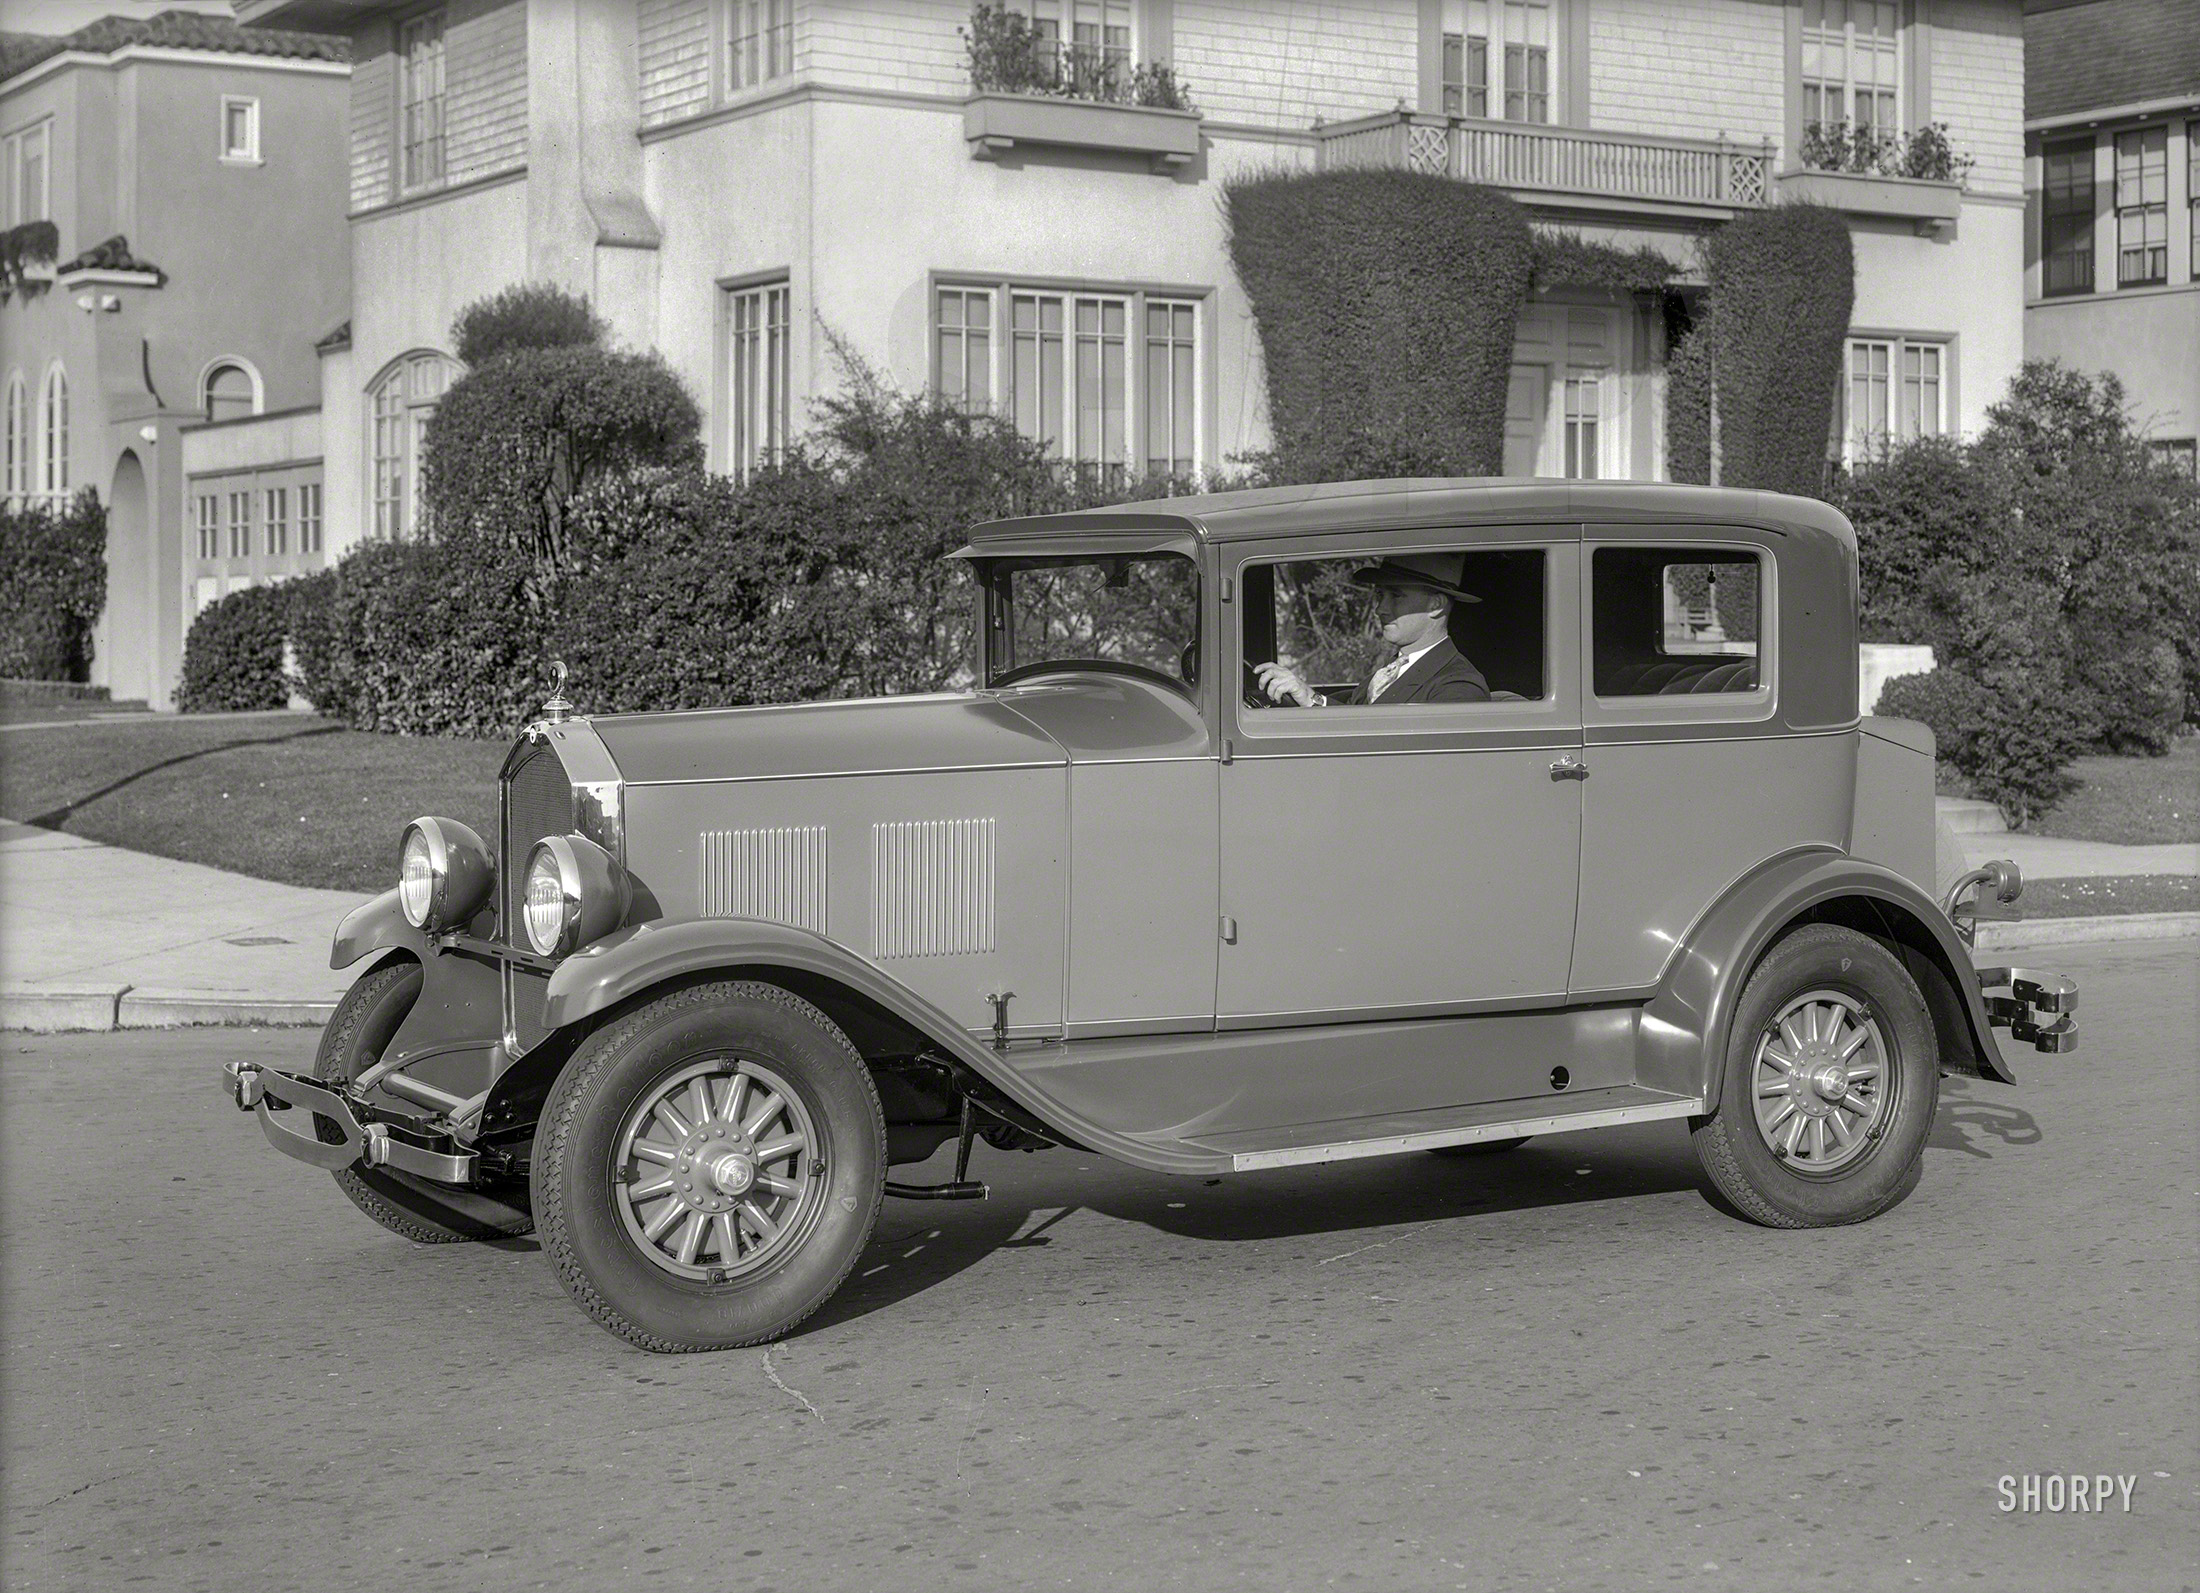 San Francisco circa 1927. "Jordan Air Line 8." Latest addition to the Shorpy Archive of Archaic Automobiles. Glass negative by Chris Helin. View full size.